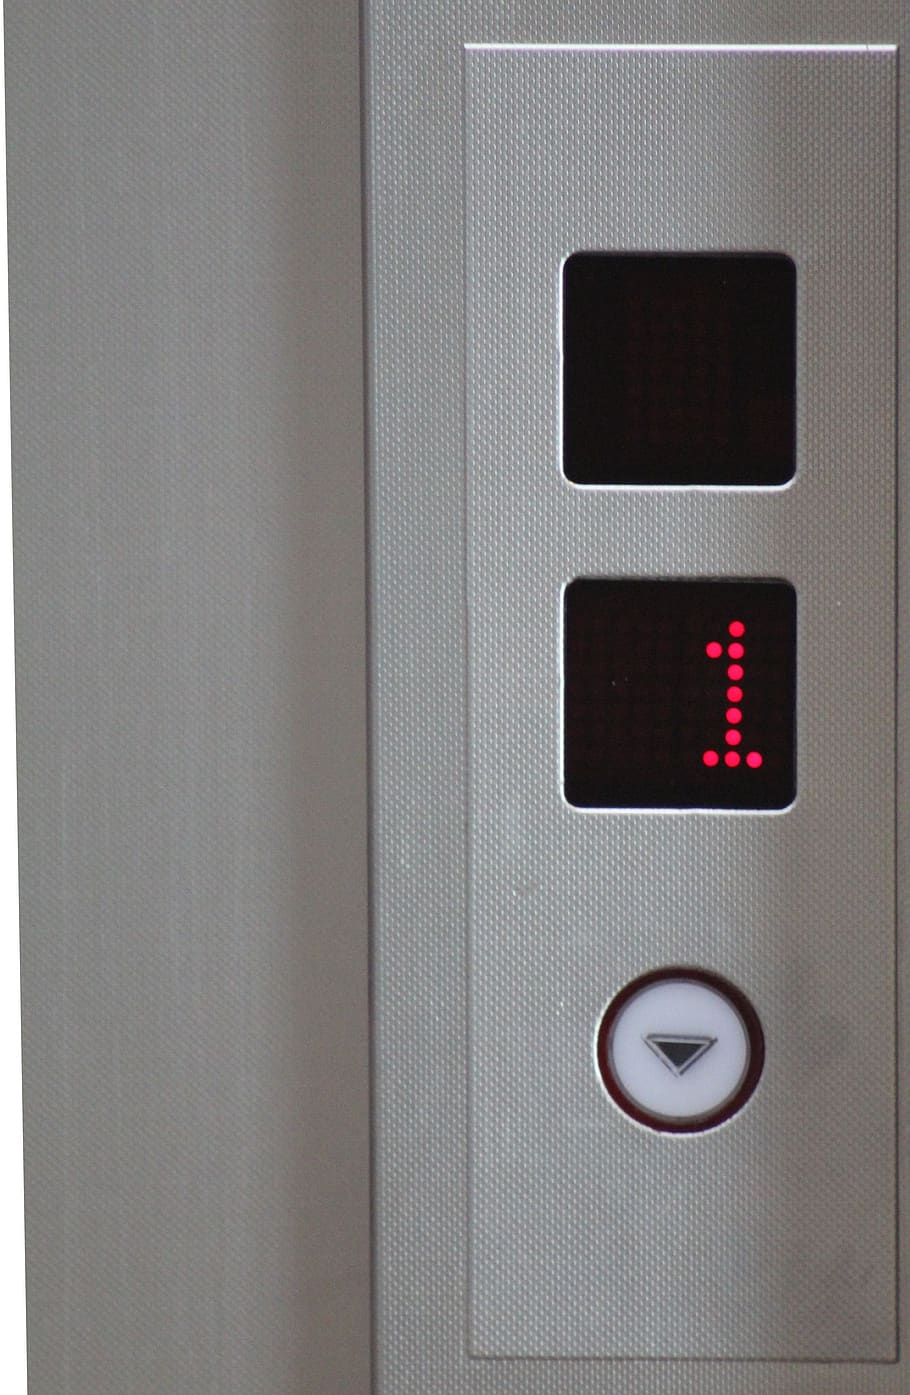 lift, elevator, one, hotel, floor, panel, lifting, number, technology, push button